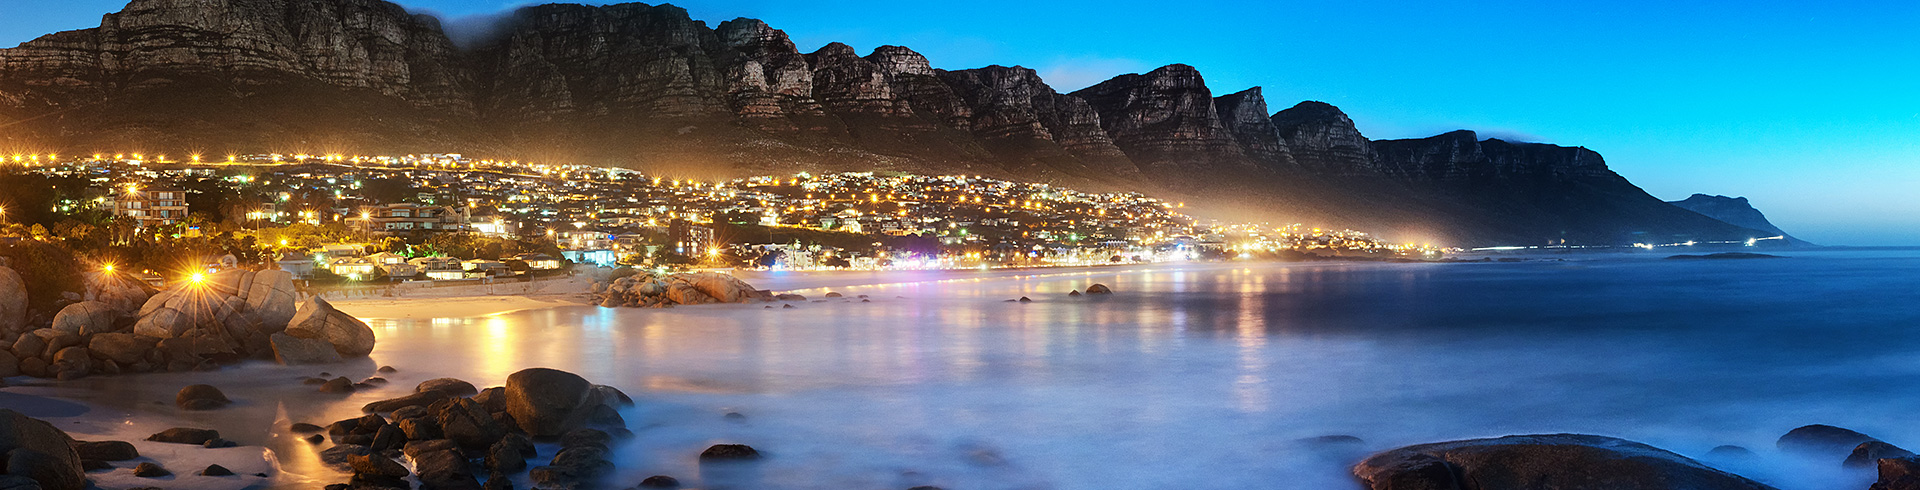 Discounted flight tickets to Cape Town - IFlyFirstClass